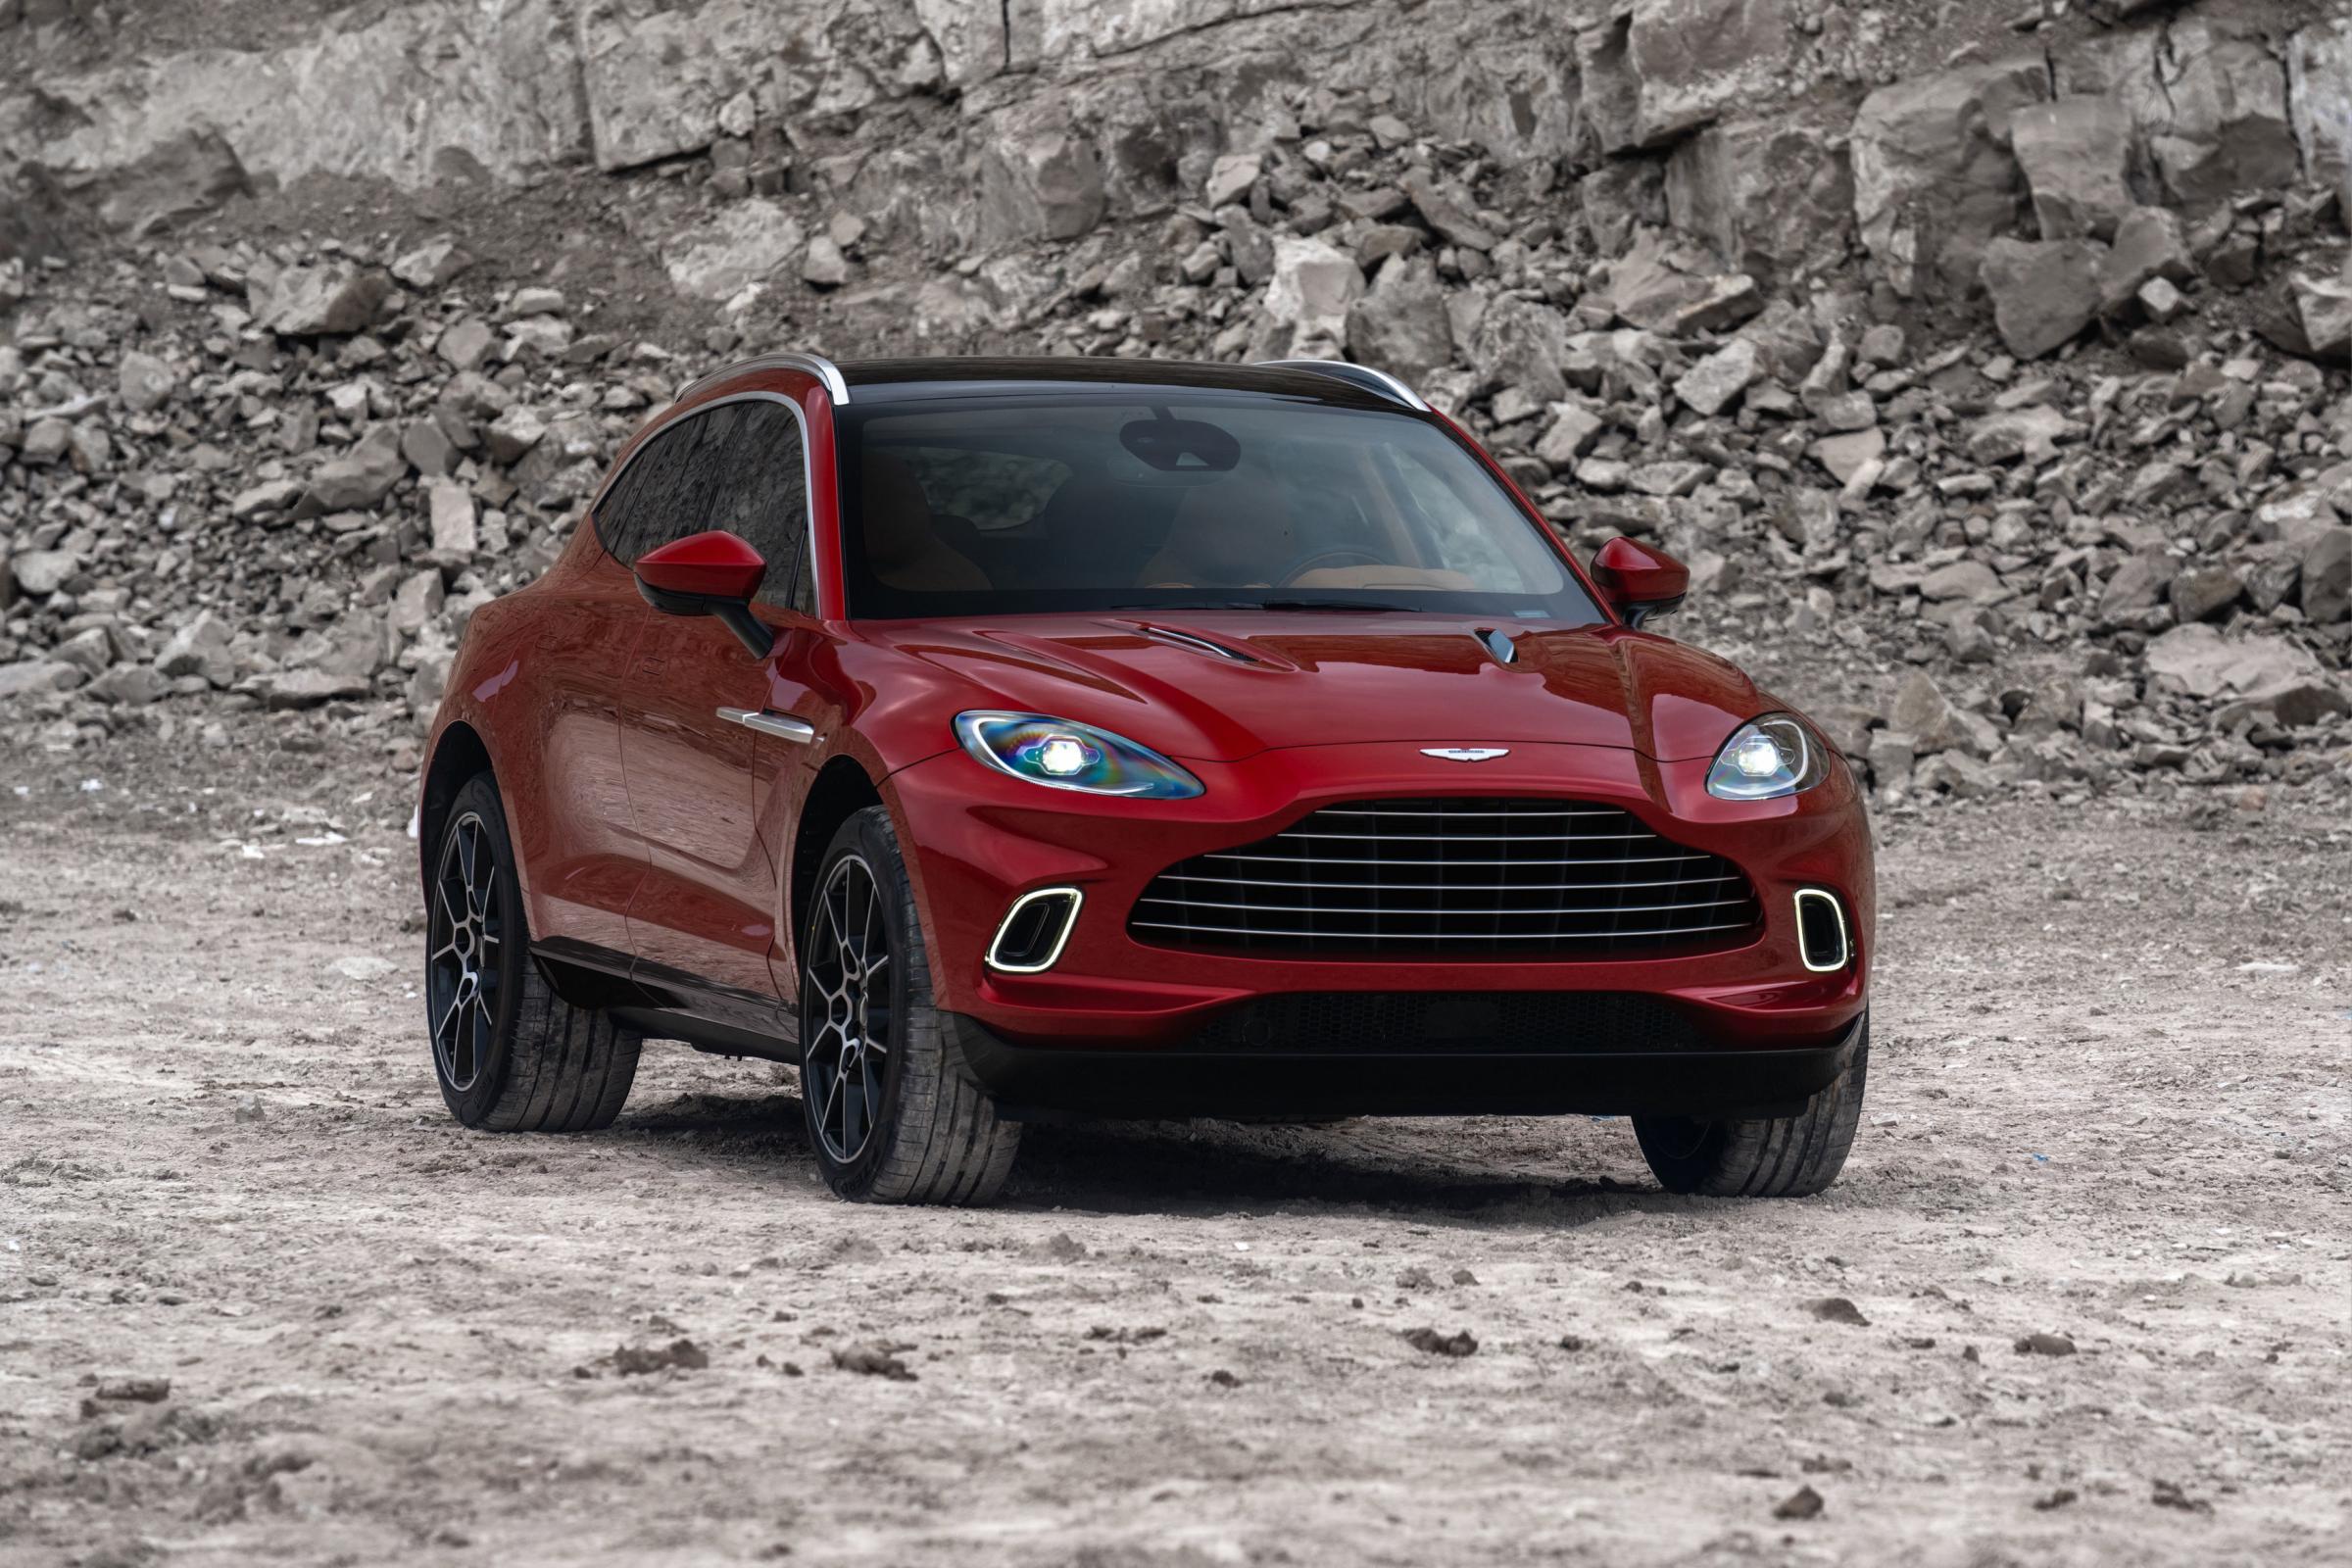 FIRST LOOK: Aston Martin launches SUV - the £158,000 DBX